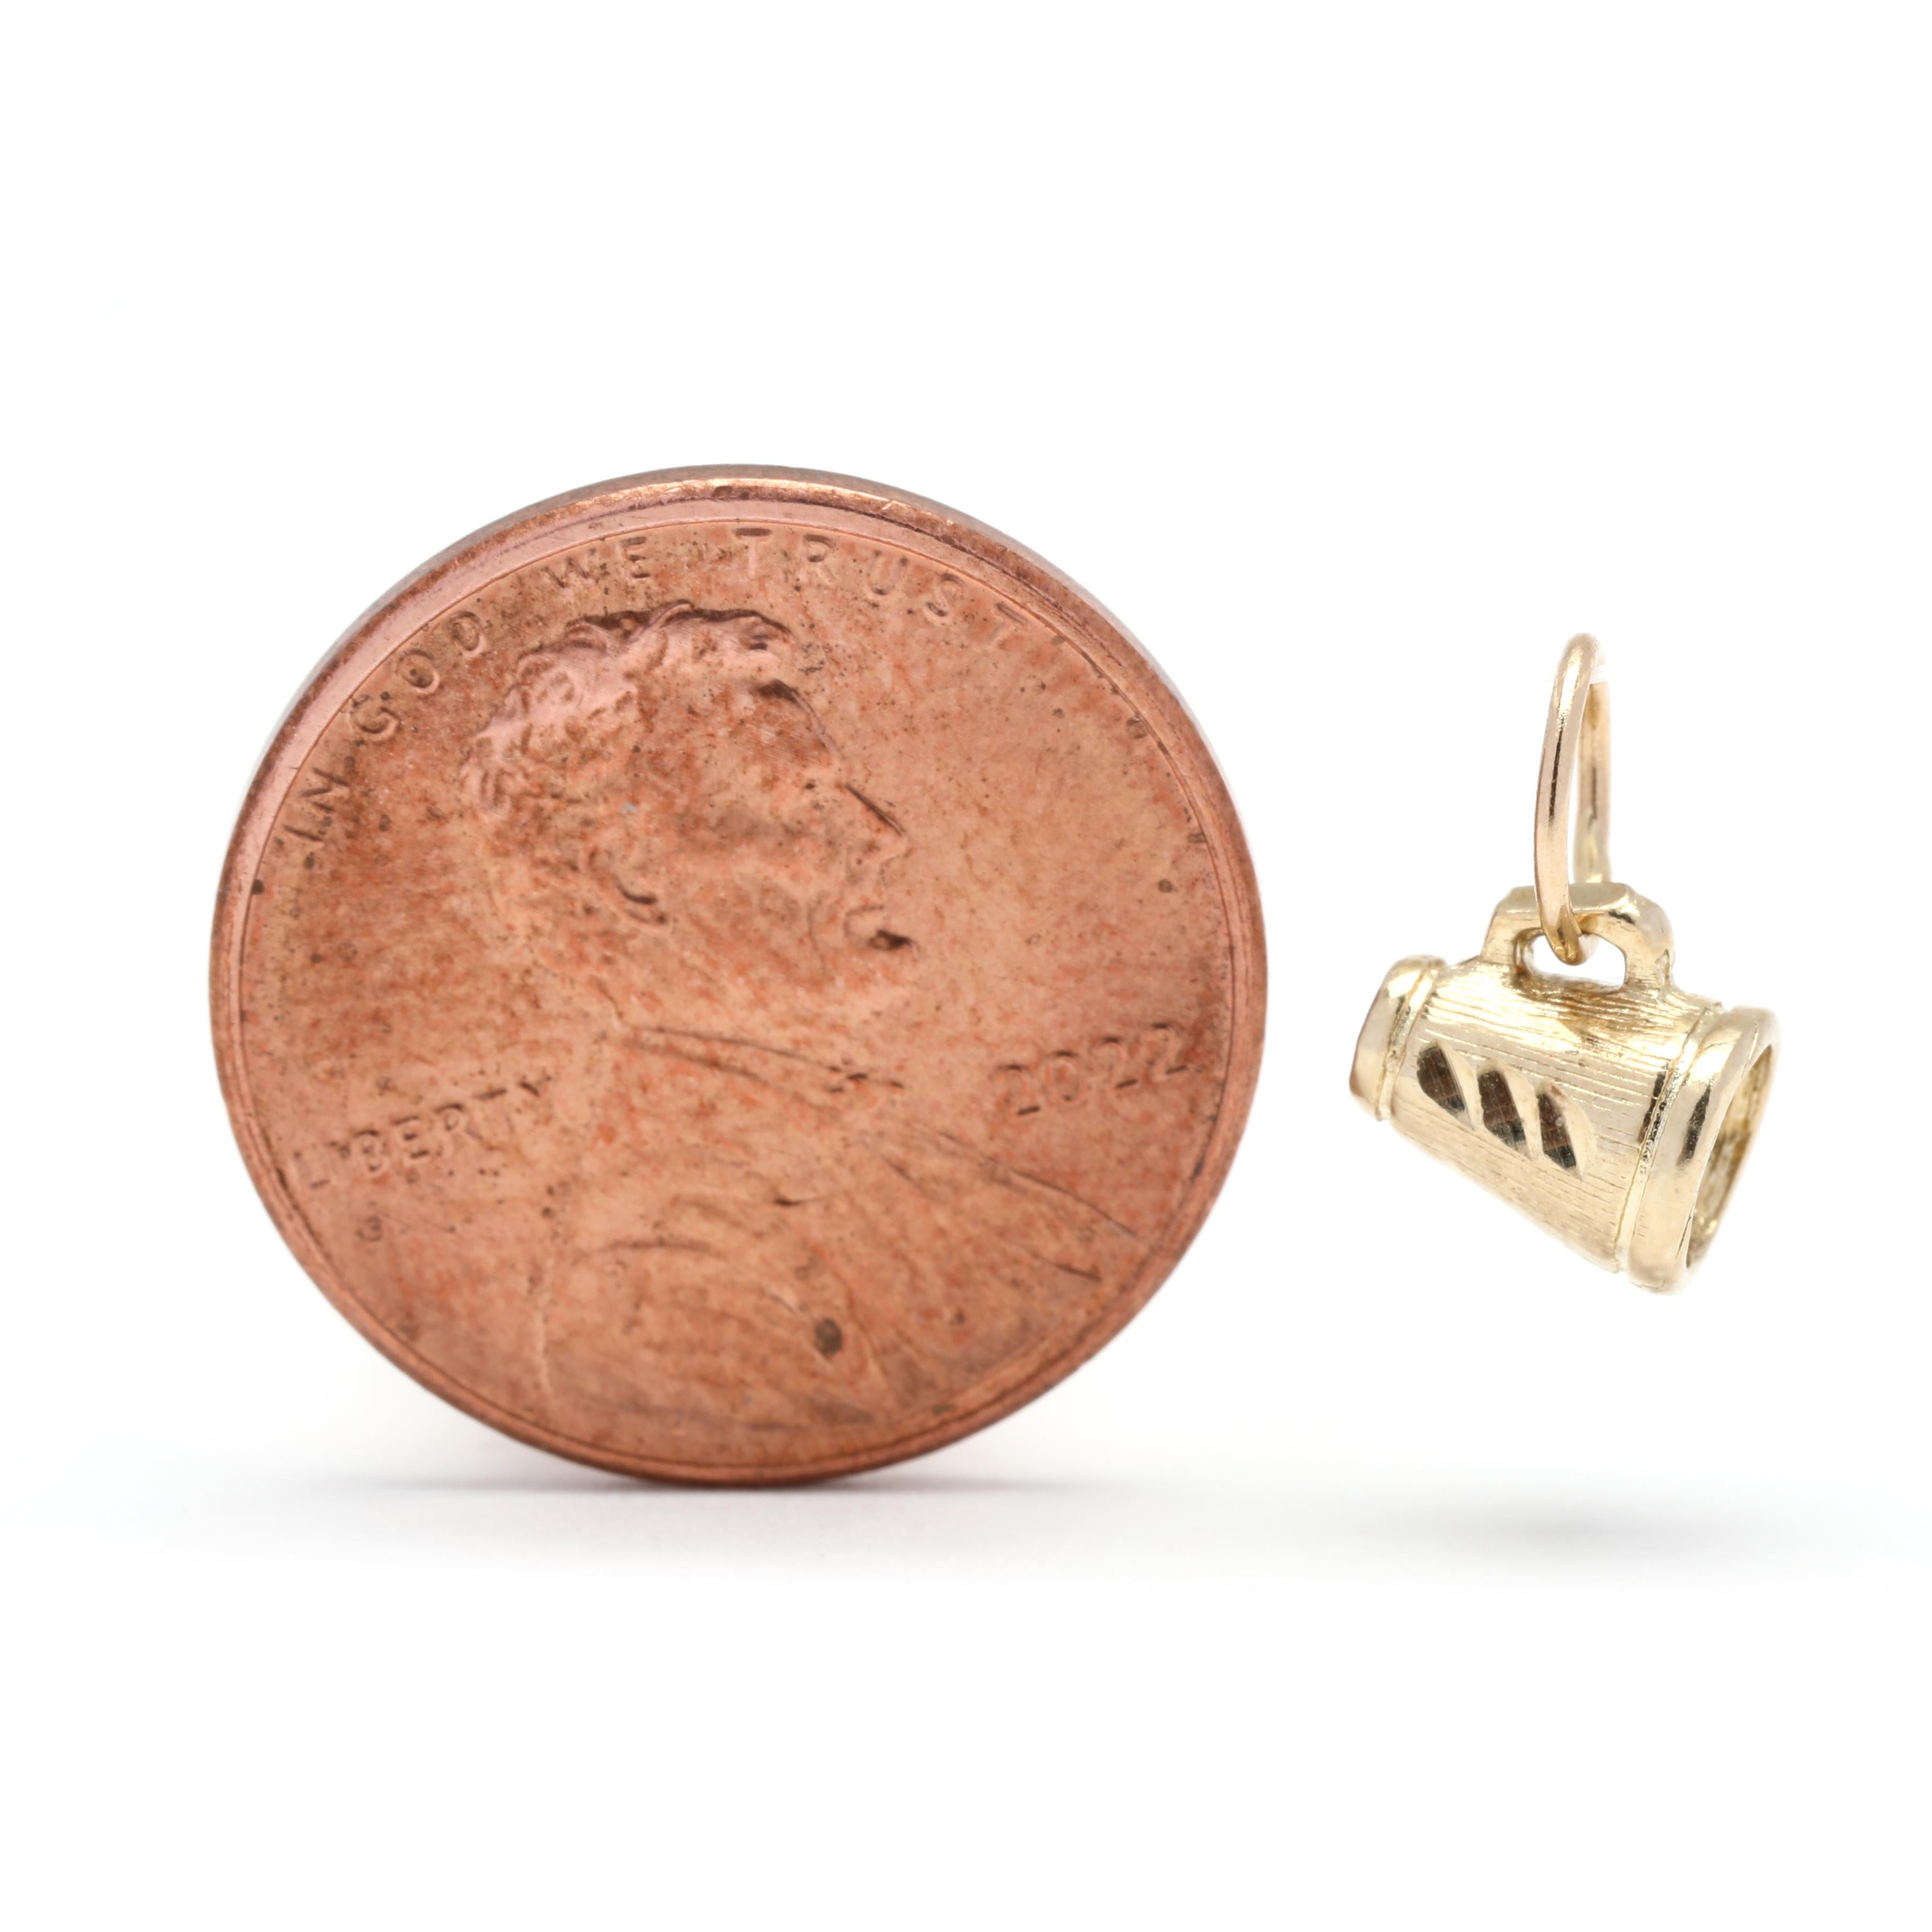 This vintage mini megaphone charm is crafted from 14K yellow gold and measures 3/8 inch in length. This charm is perfect for any cheerleader or fan of vintage jewelry. The beautiful gold megaphone is a great reminder of cherished memories and a fun